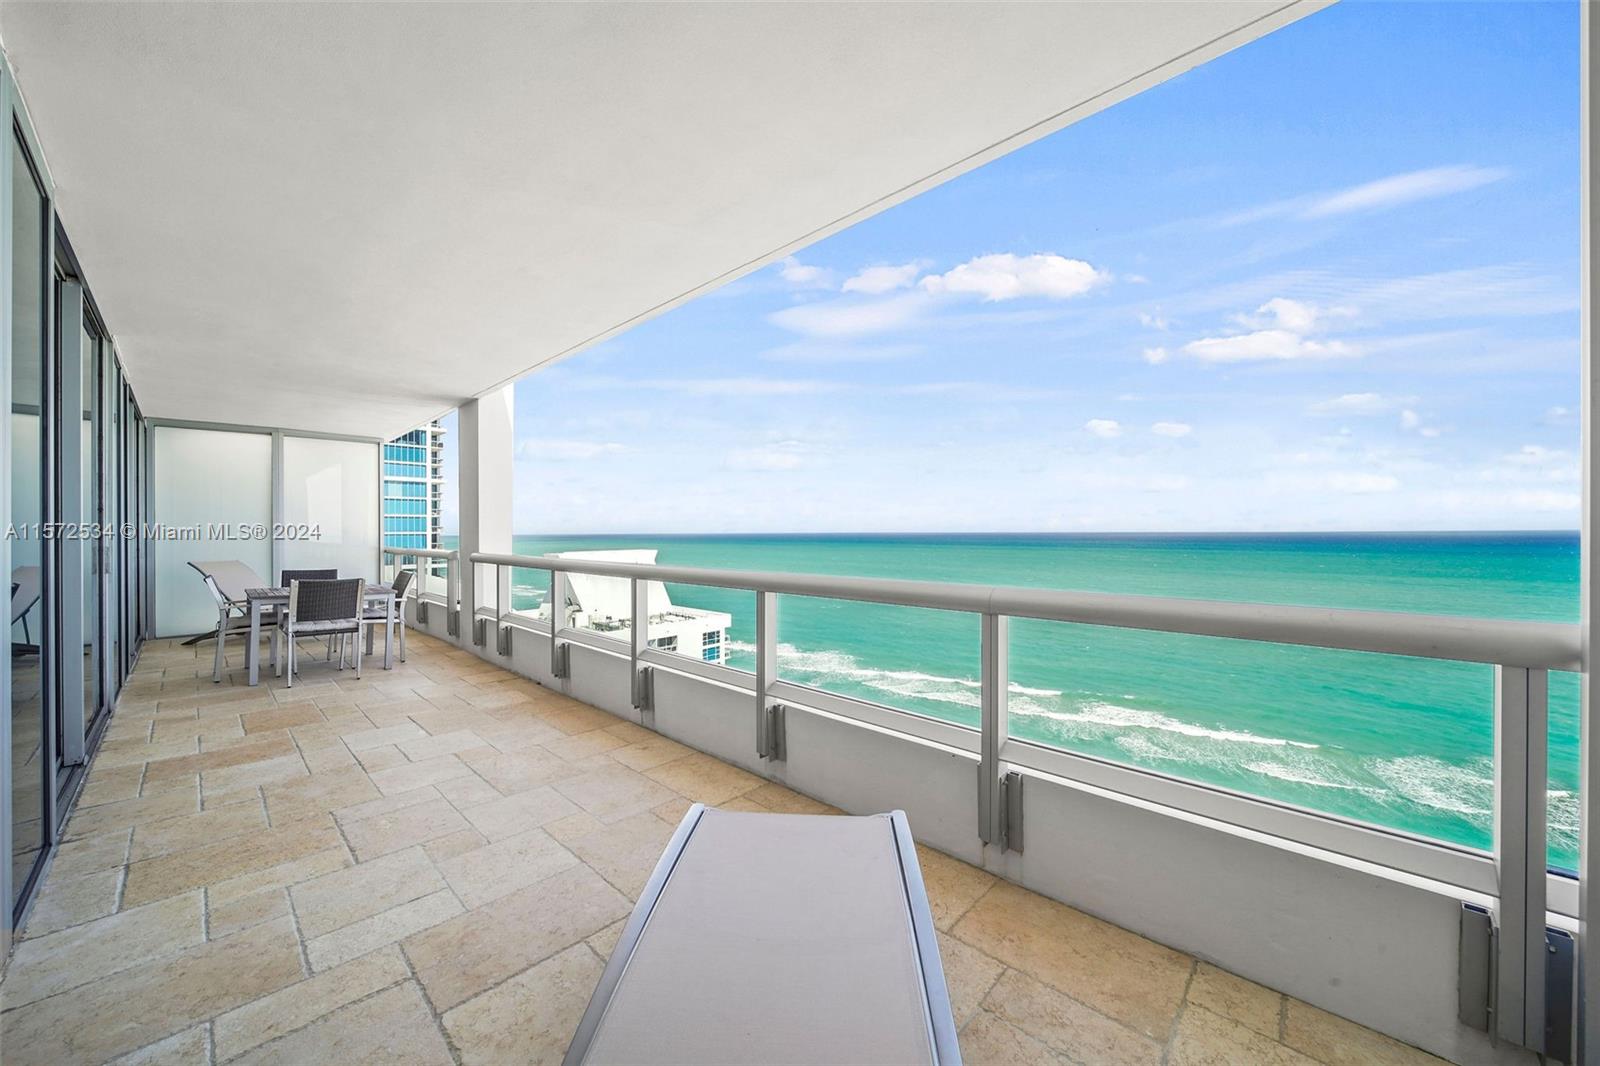 Rare opportunity to own DIRECT OCEAN VIEW Penthouse unit at Carillon Miami Wellness Resort, a premier oceanfront luxury property with tranquil ocean view from all rooms.  Large, deep balcony for outdoor living.  (Condo fees & real estate taxes only assessed on interior sqft.) Includes 8 Carillon “resident memberships.” Full use of 70,000 sq ft fitness and spa center with classes 7-days-week from morning until evening. Luxuriate in a myriad of wet therapies to relax mind, body, and soul. Four pools, restaurant, poolside cafe, beach service, salon, corner store, boutique, wellness staff, 24-hour security, valet, boardwalk.  Quiet walking neighborhood with restaurants, all conveniences, including Publix across the street. Easy access to Bal Harbour, airports, South Beach, and Design District.